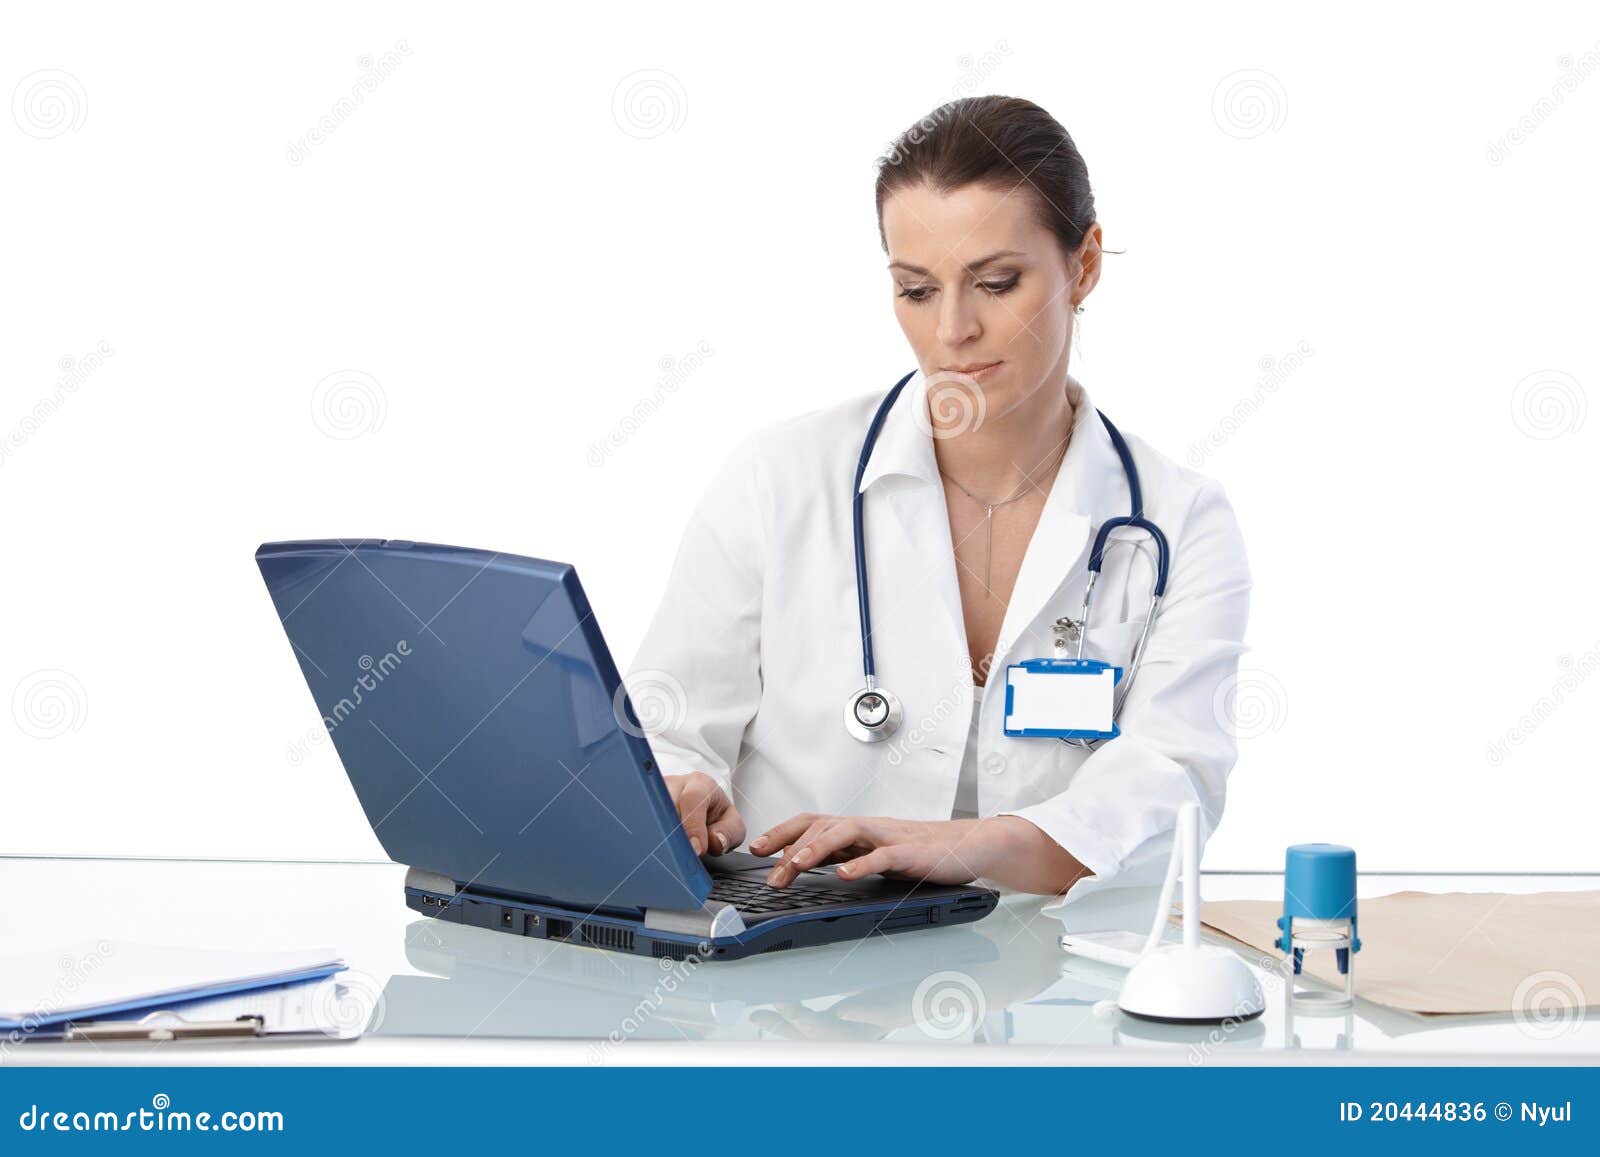 general practitioner typing on computer